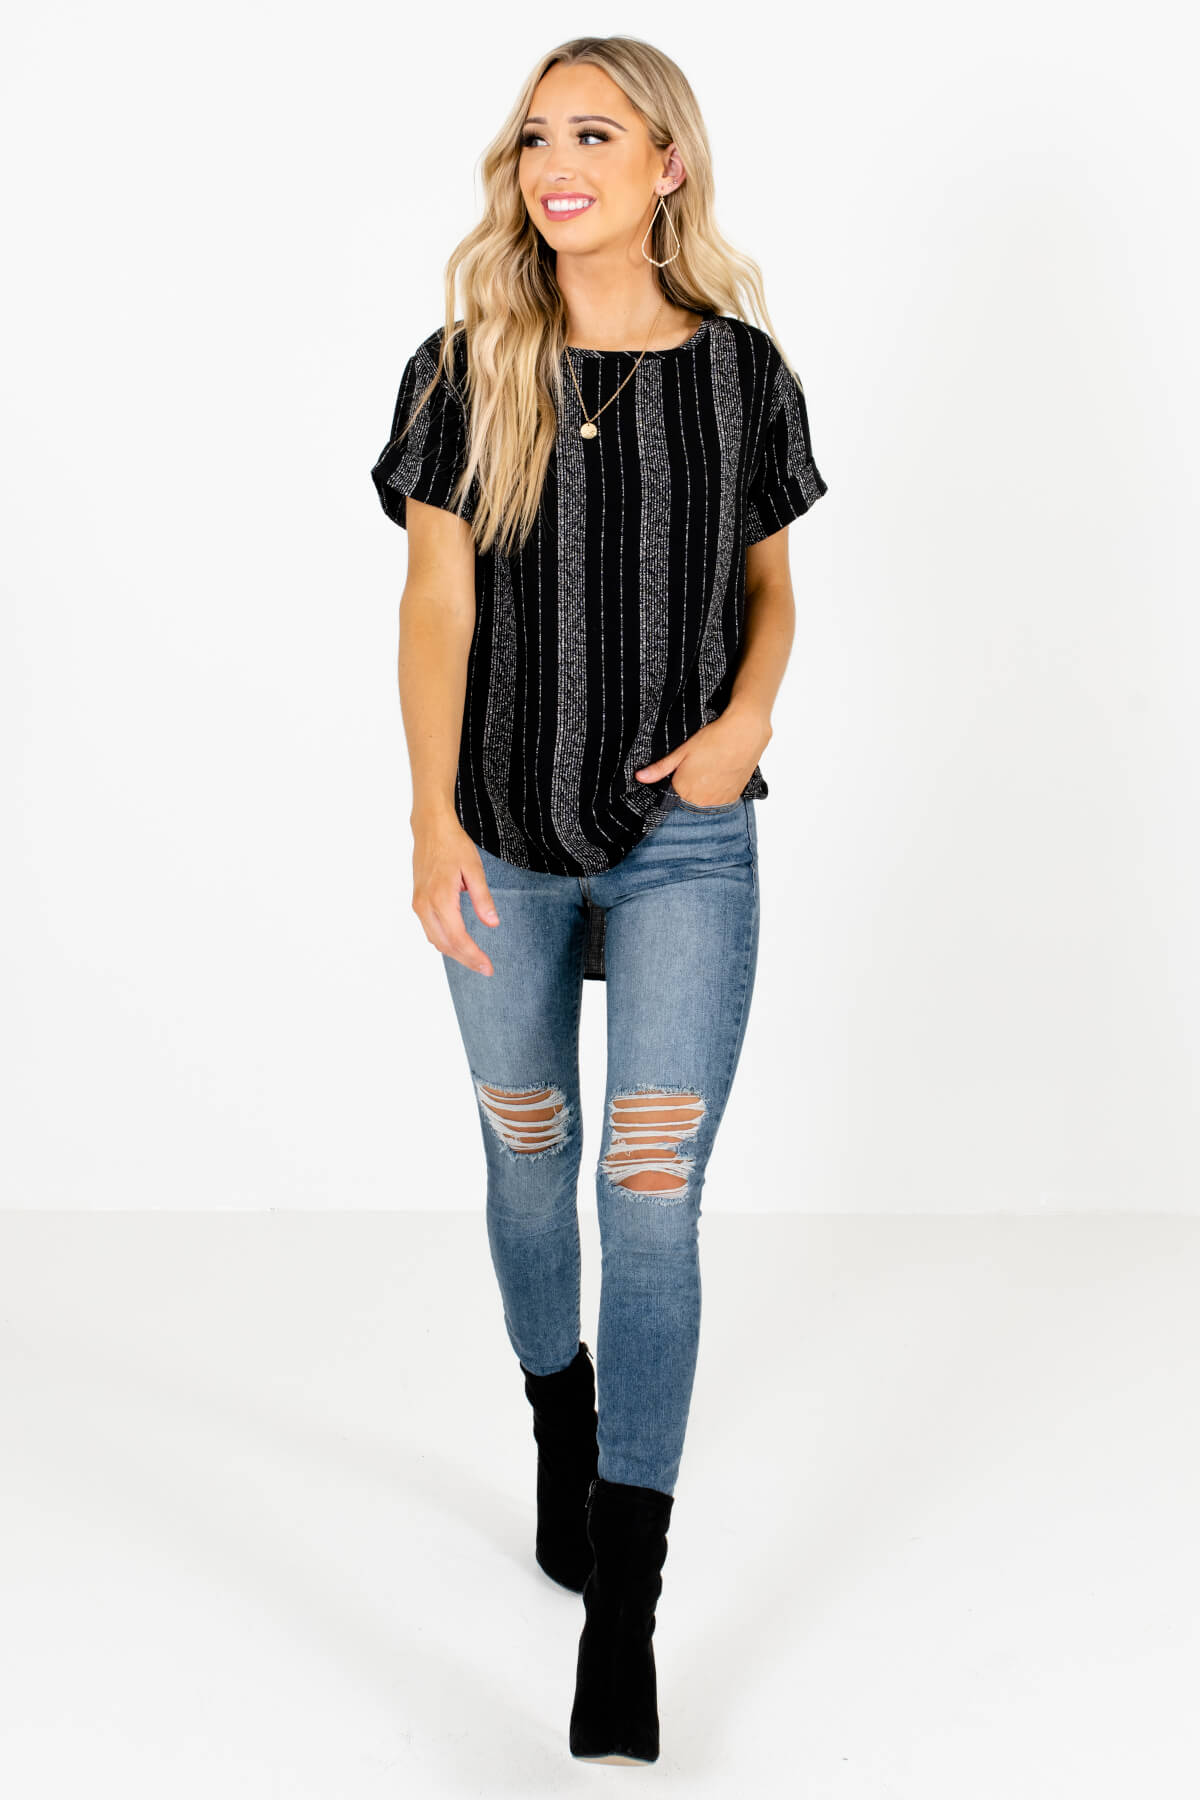 Black and Comfortable Boutique Tops for Women